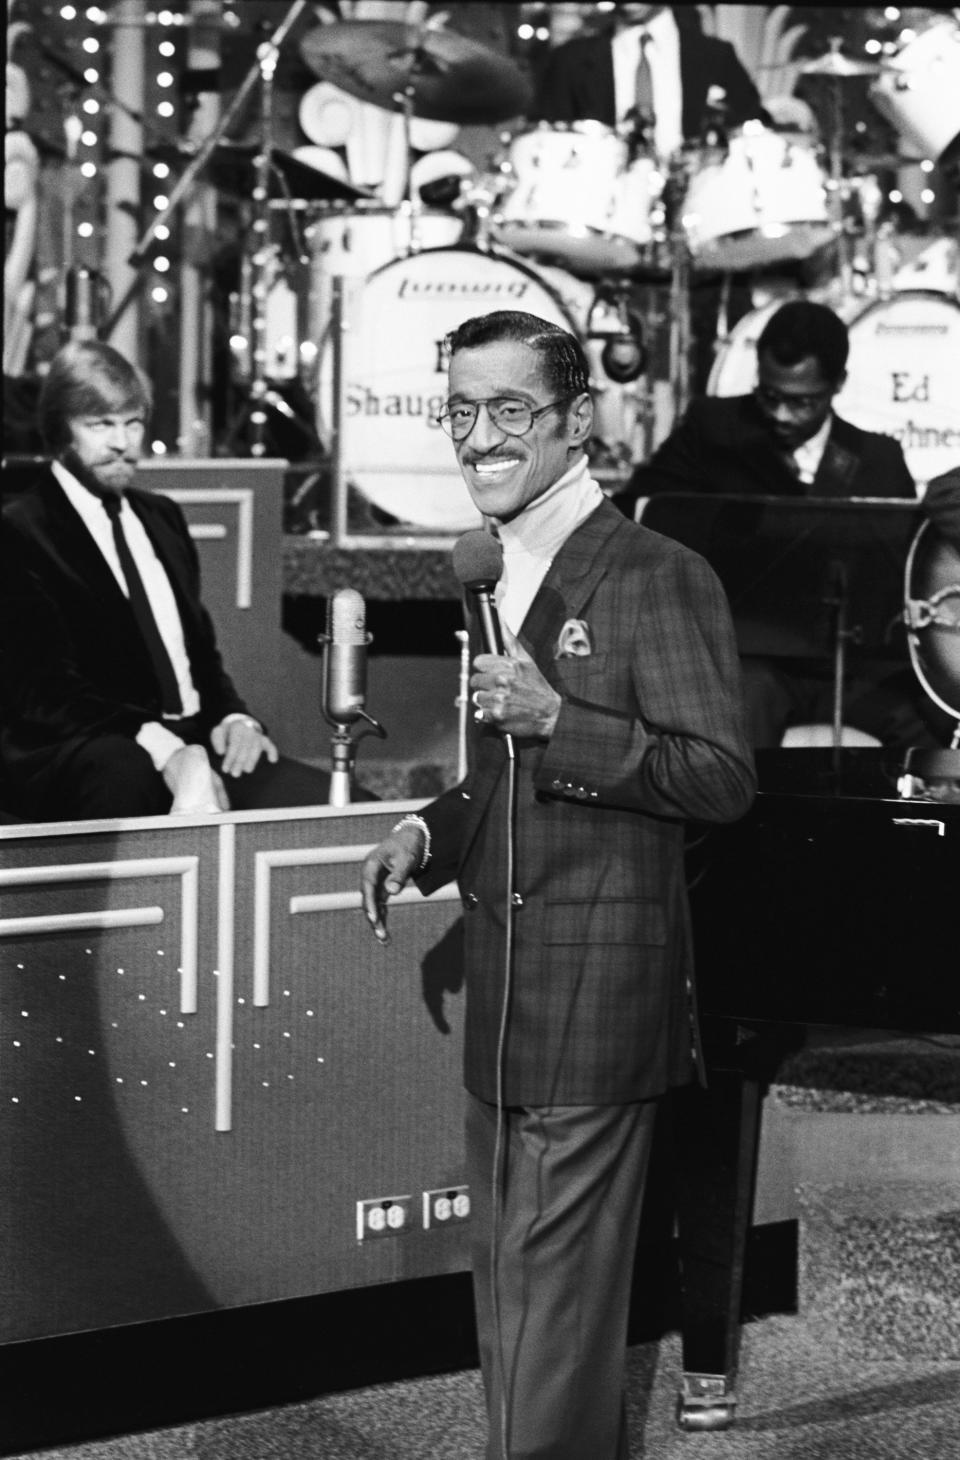 The performer during an appearance on "The Tonight Show Starring Johnny Carson" in 1985.